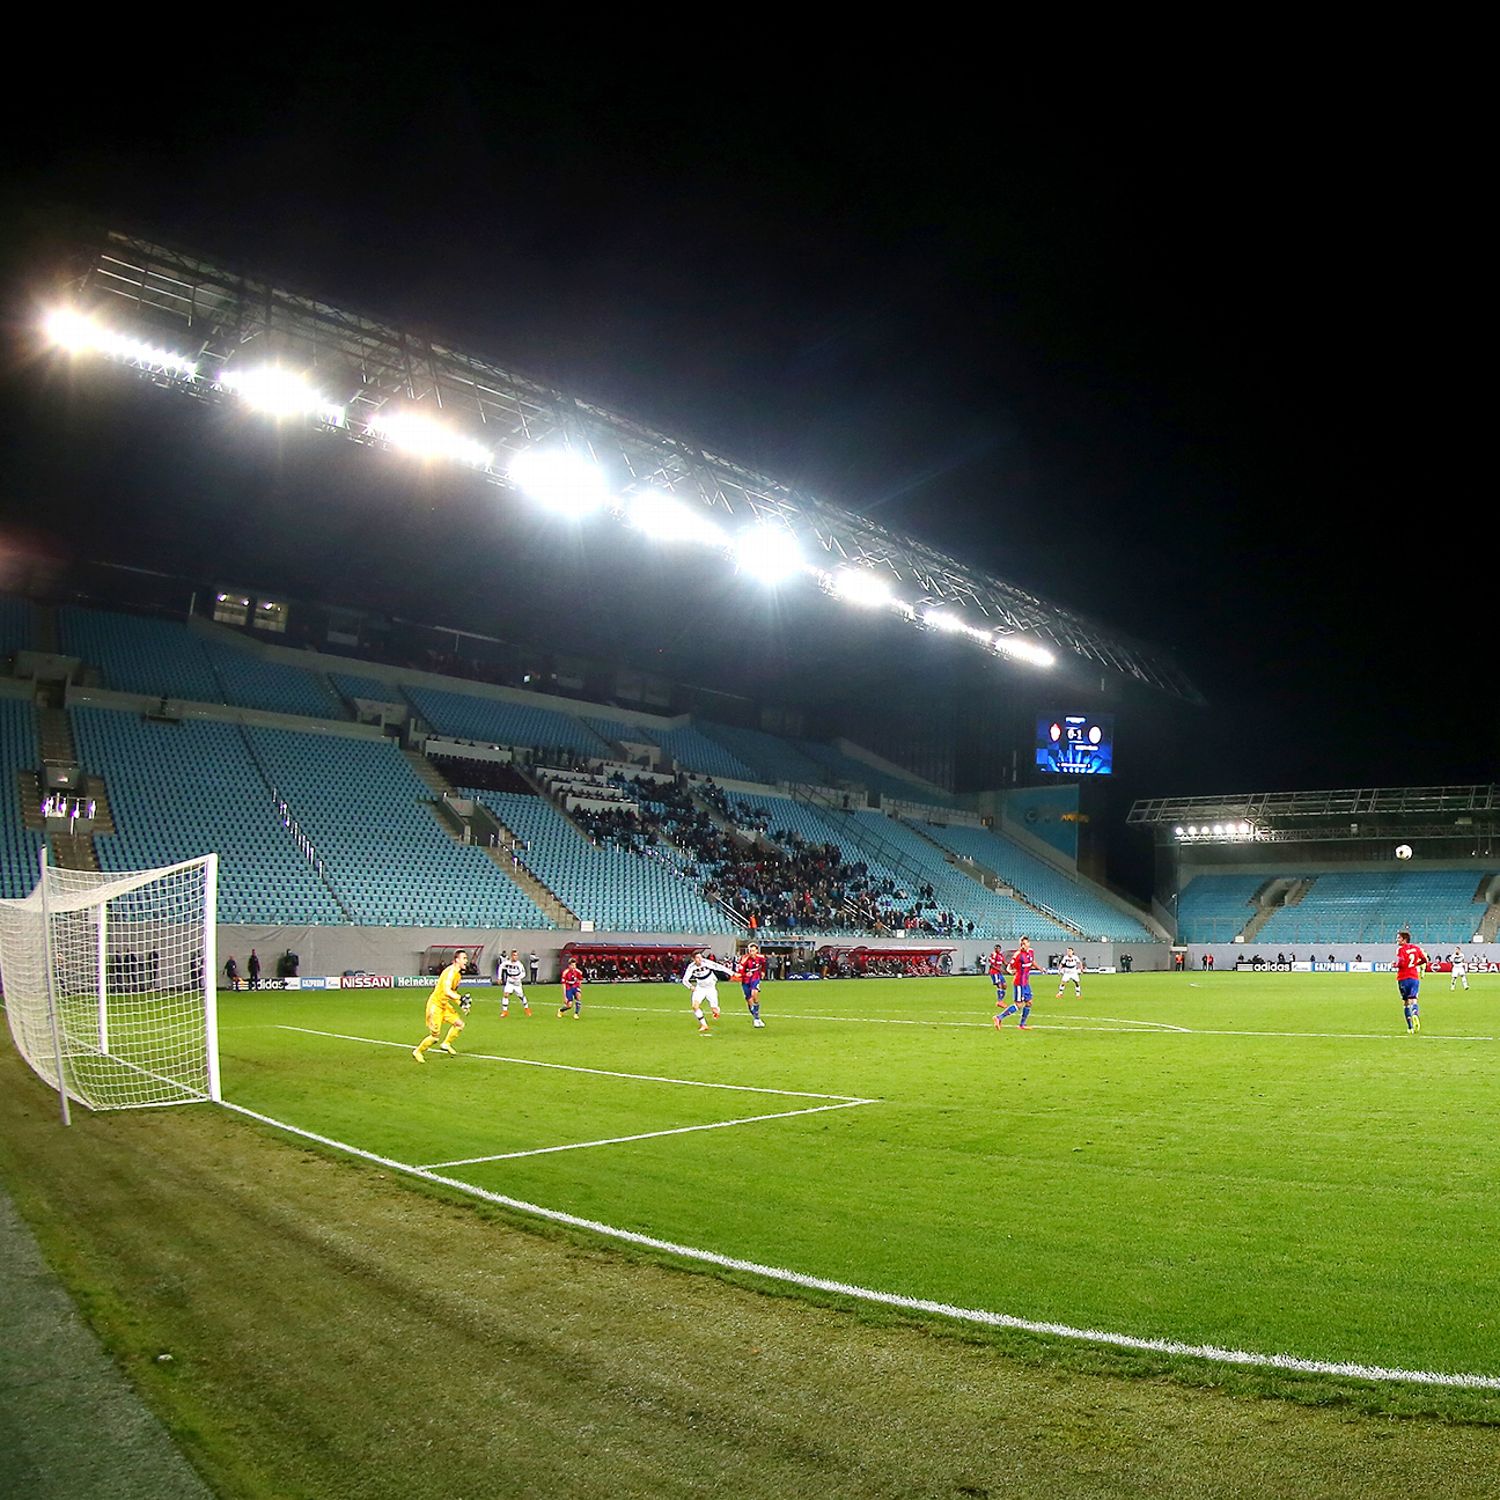 CSKA Moscow vs. Manchester City to be played in empty stadium - ESPN FC